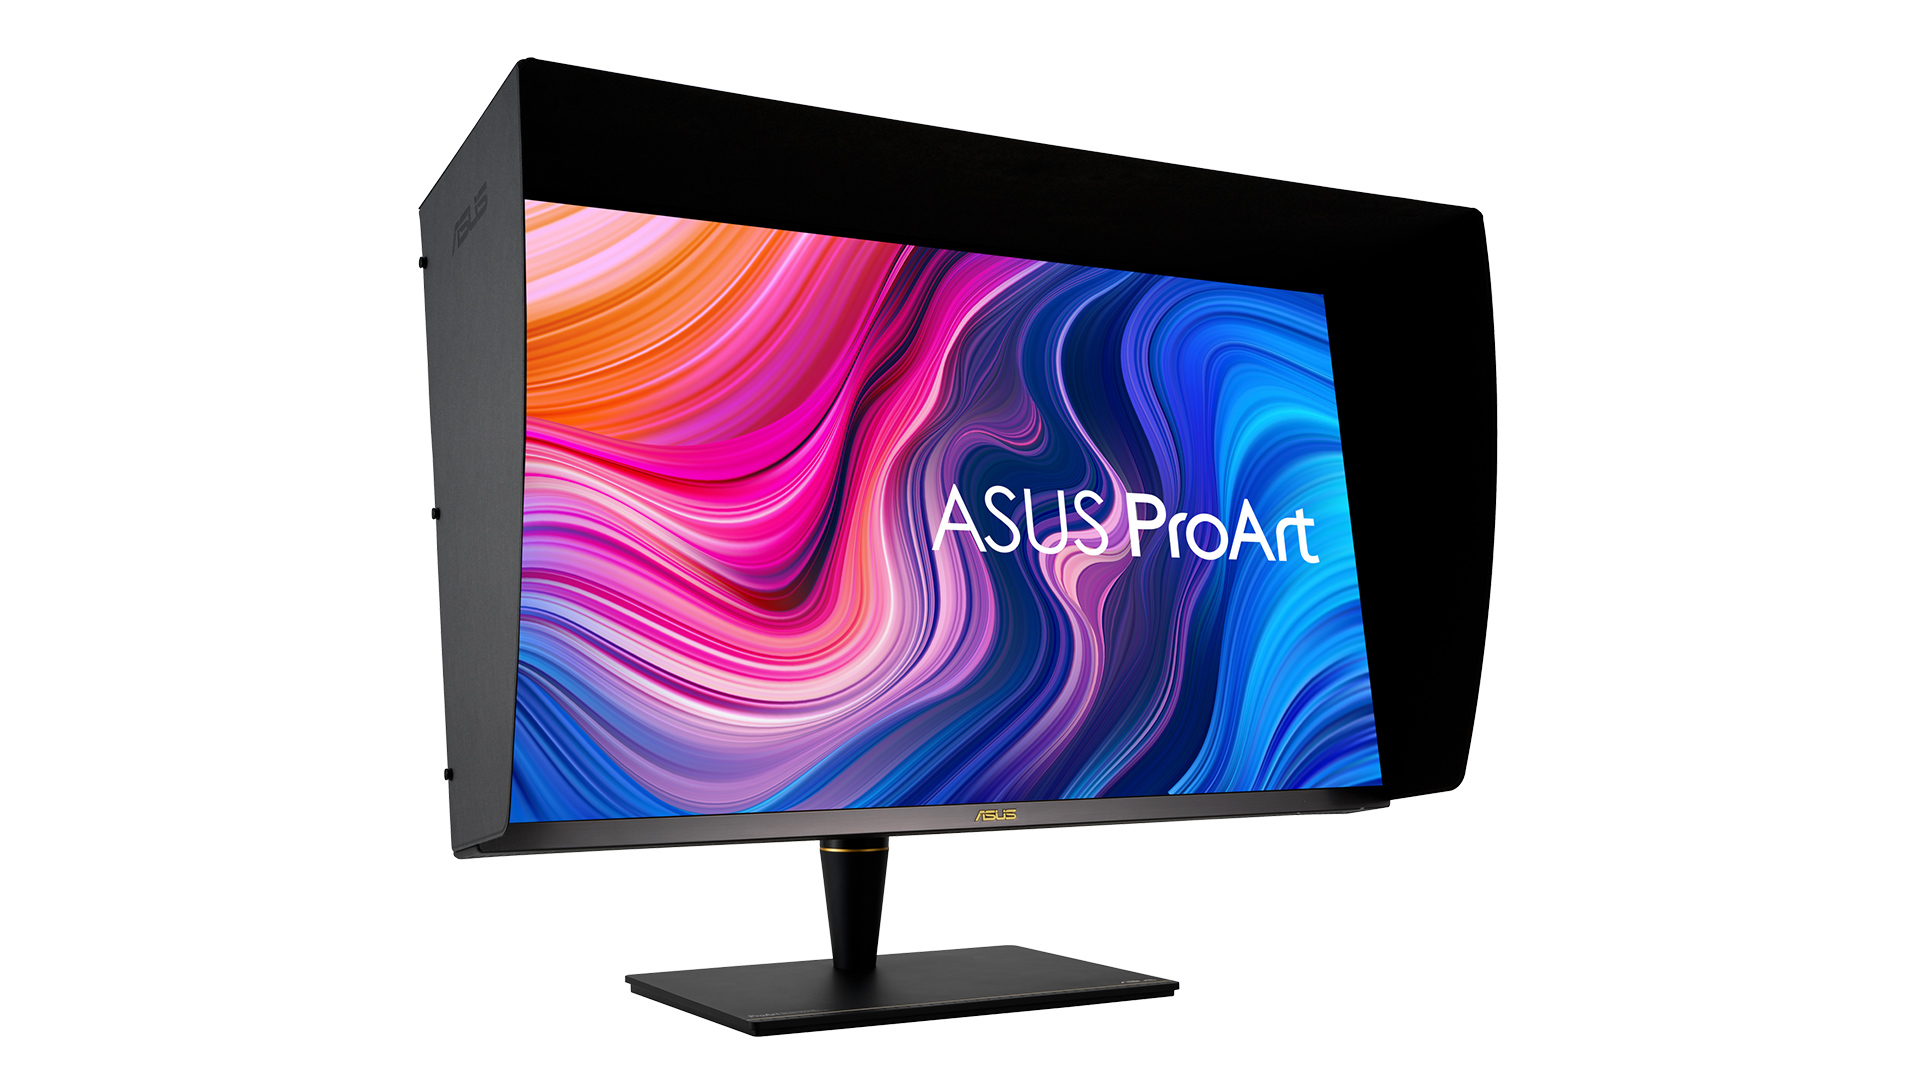 Asus Pa32ucx A Capable HDr Monitor For Petitive Price